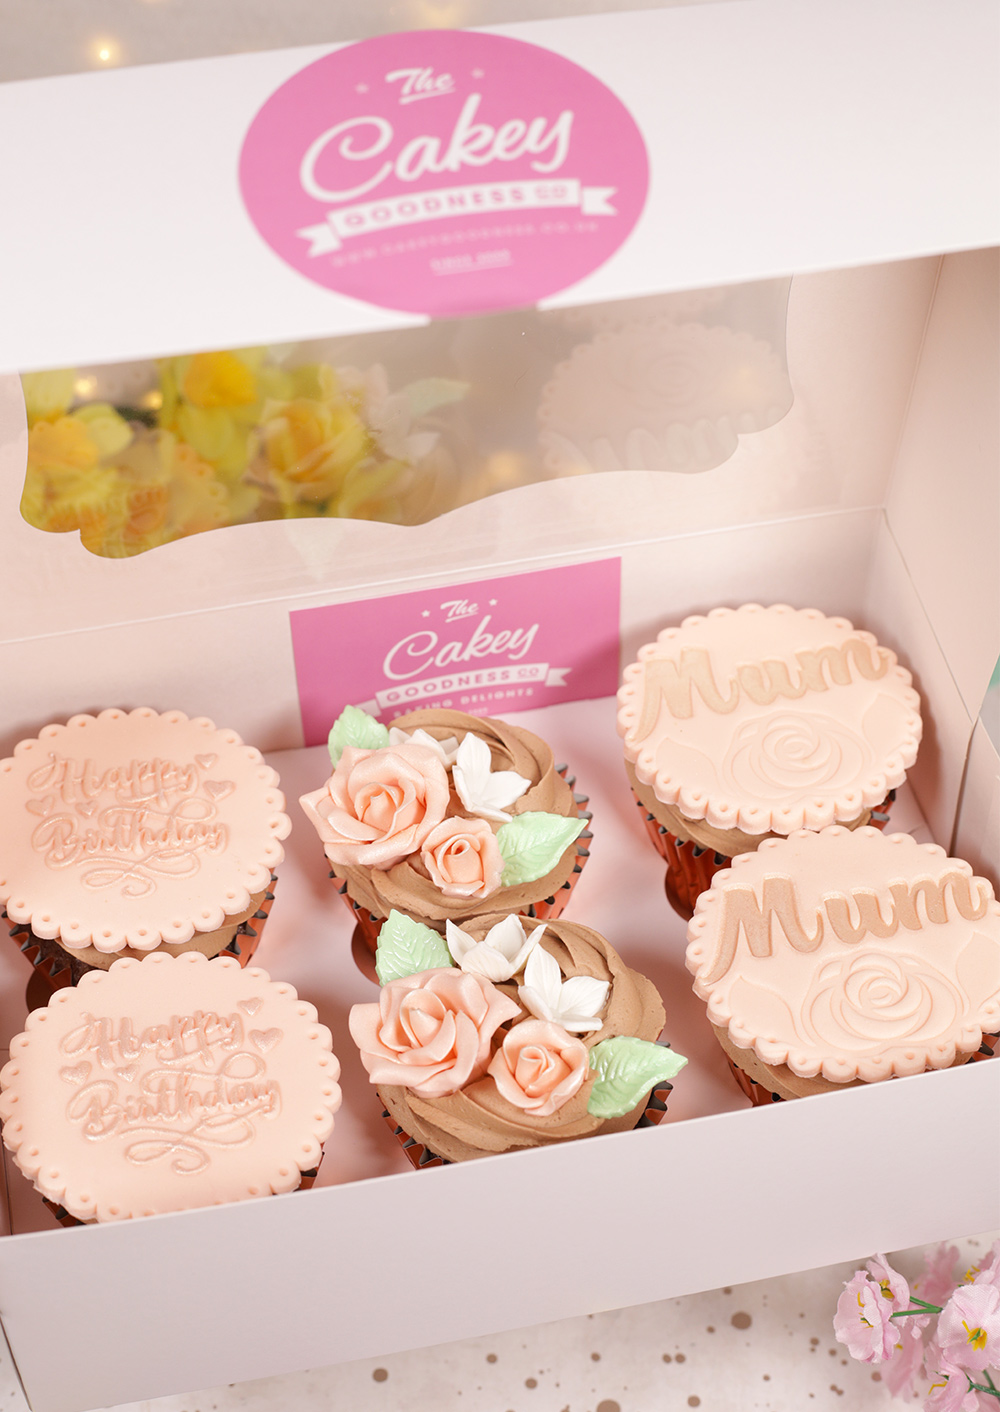 Rose Gold 50th Cupcakes - Cakey Goodness